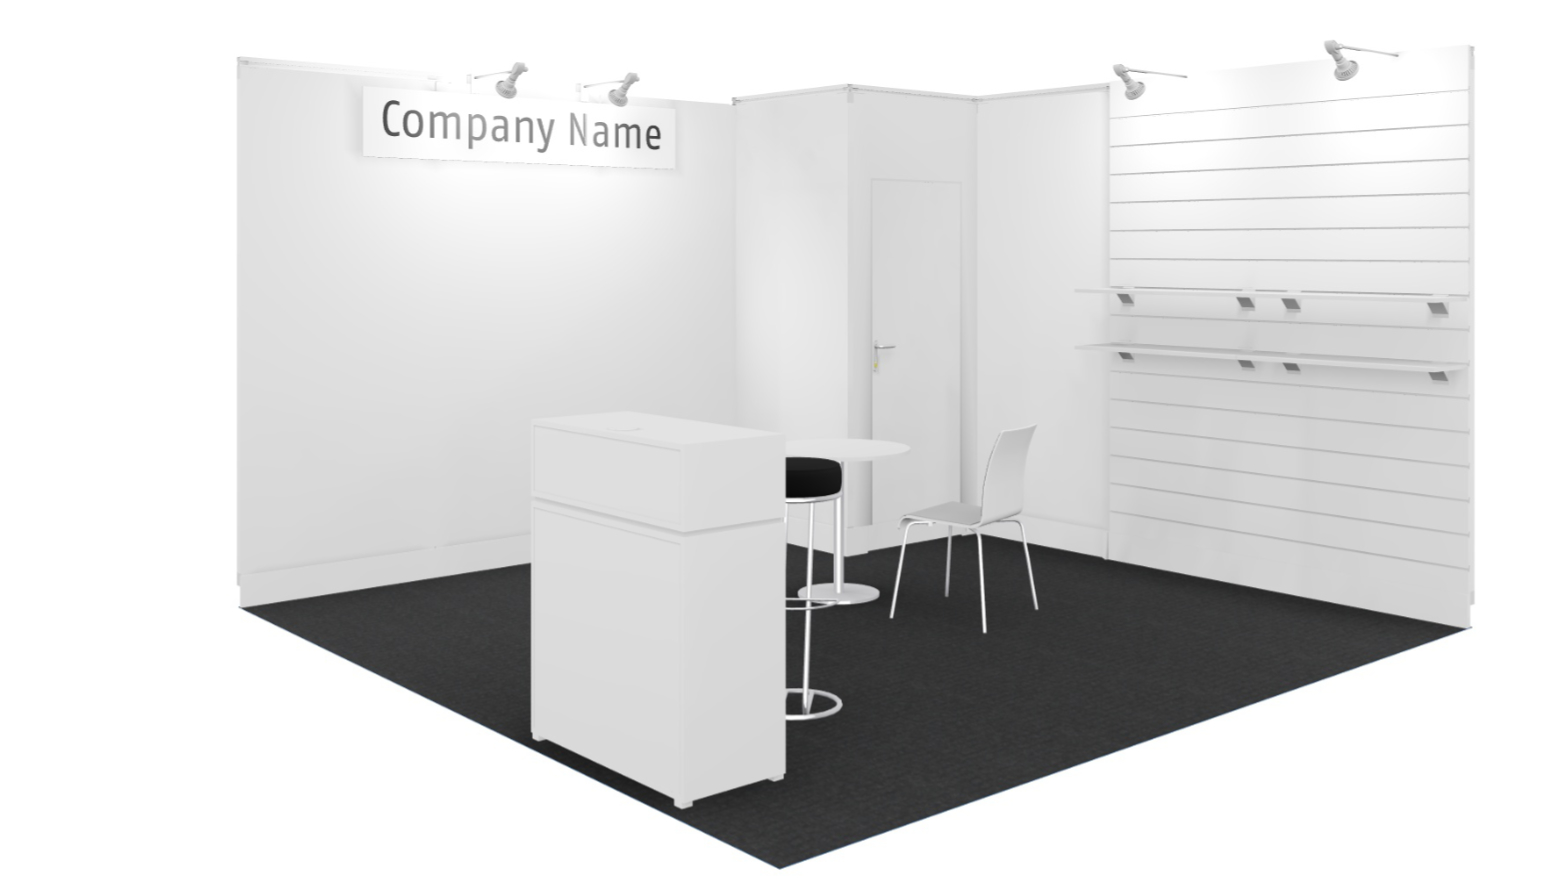 12 m² booth